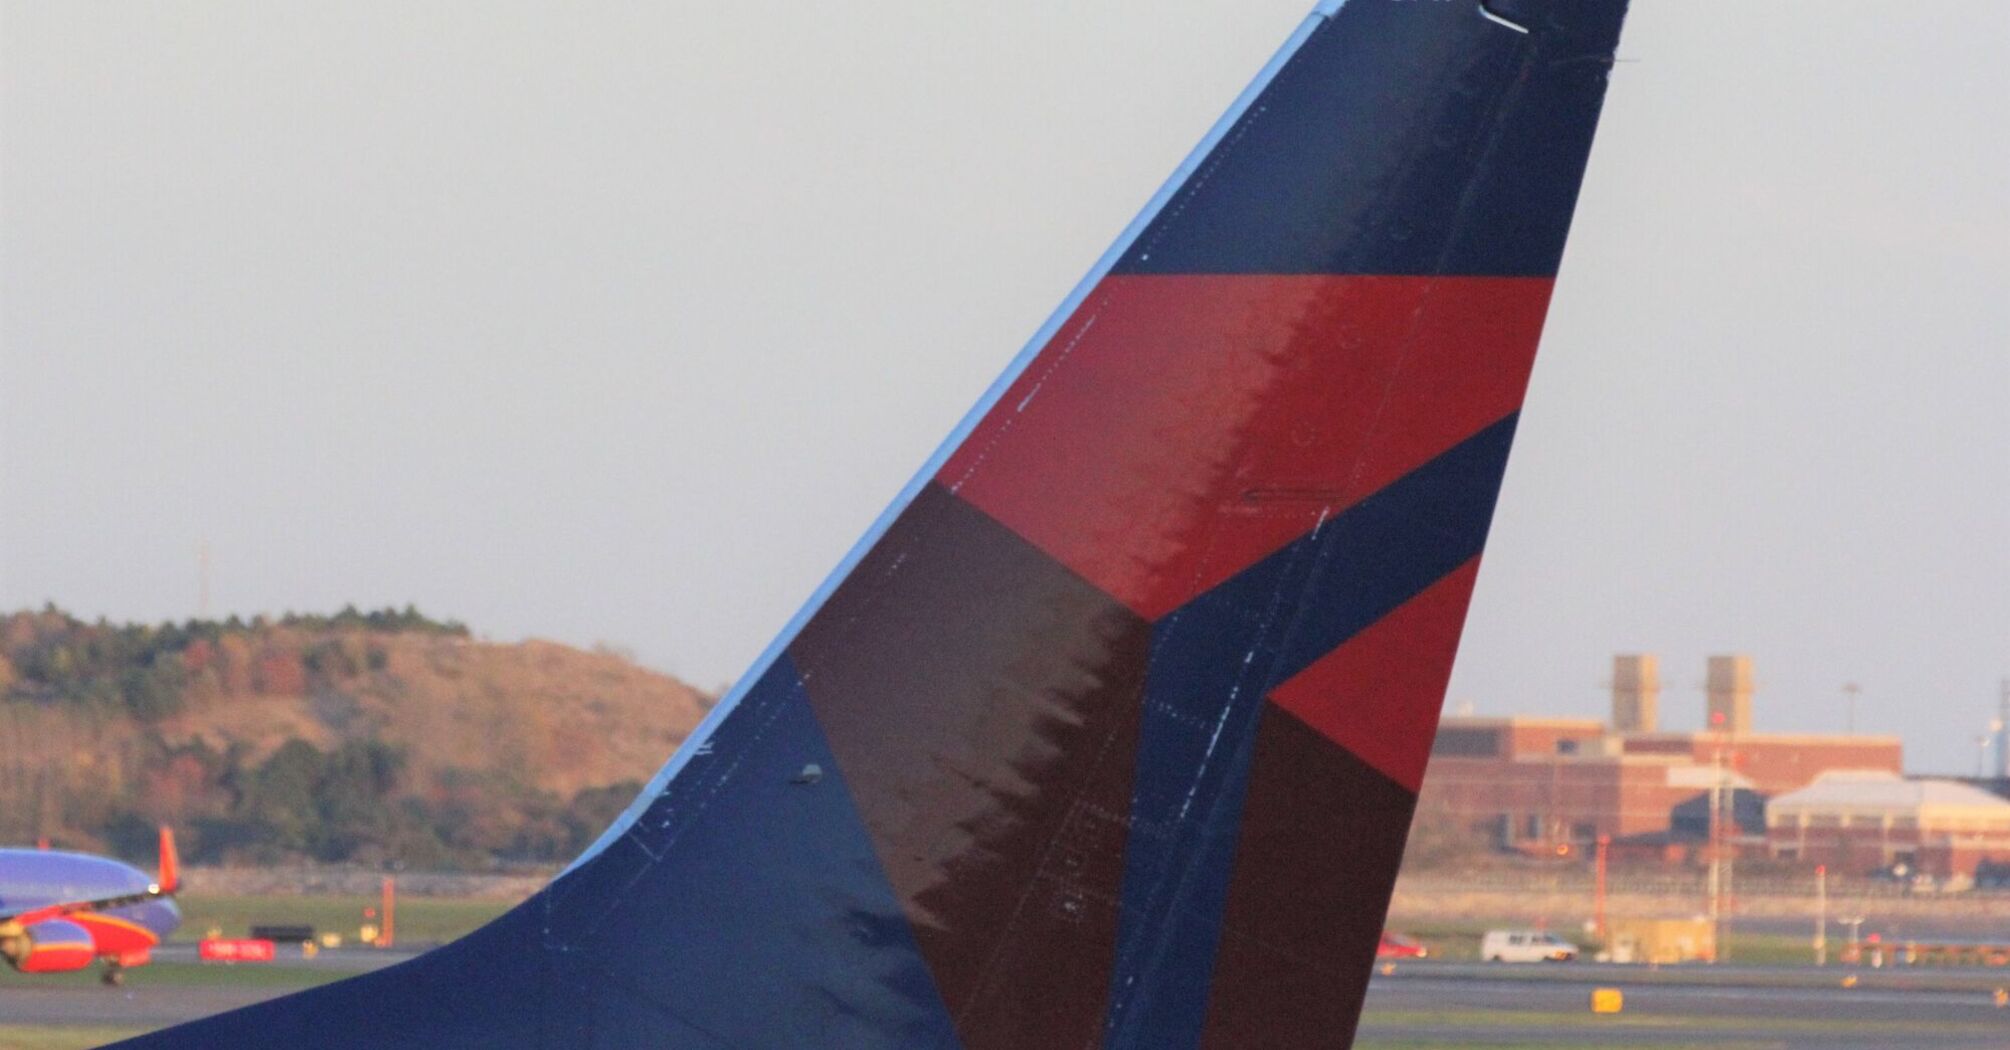 Close-up of a Delta Air Lines aircraft tail showing the red, blue, and dark blue livery